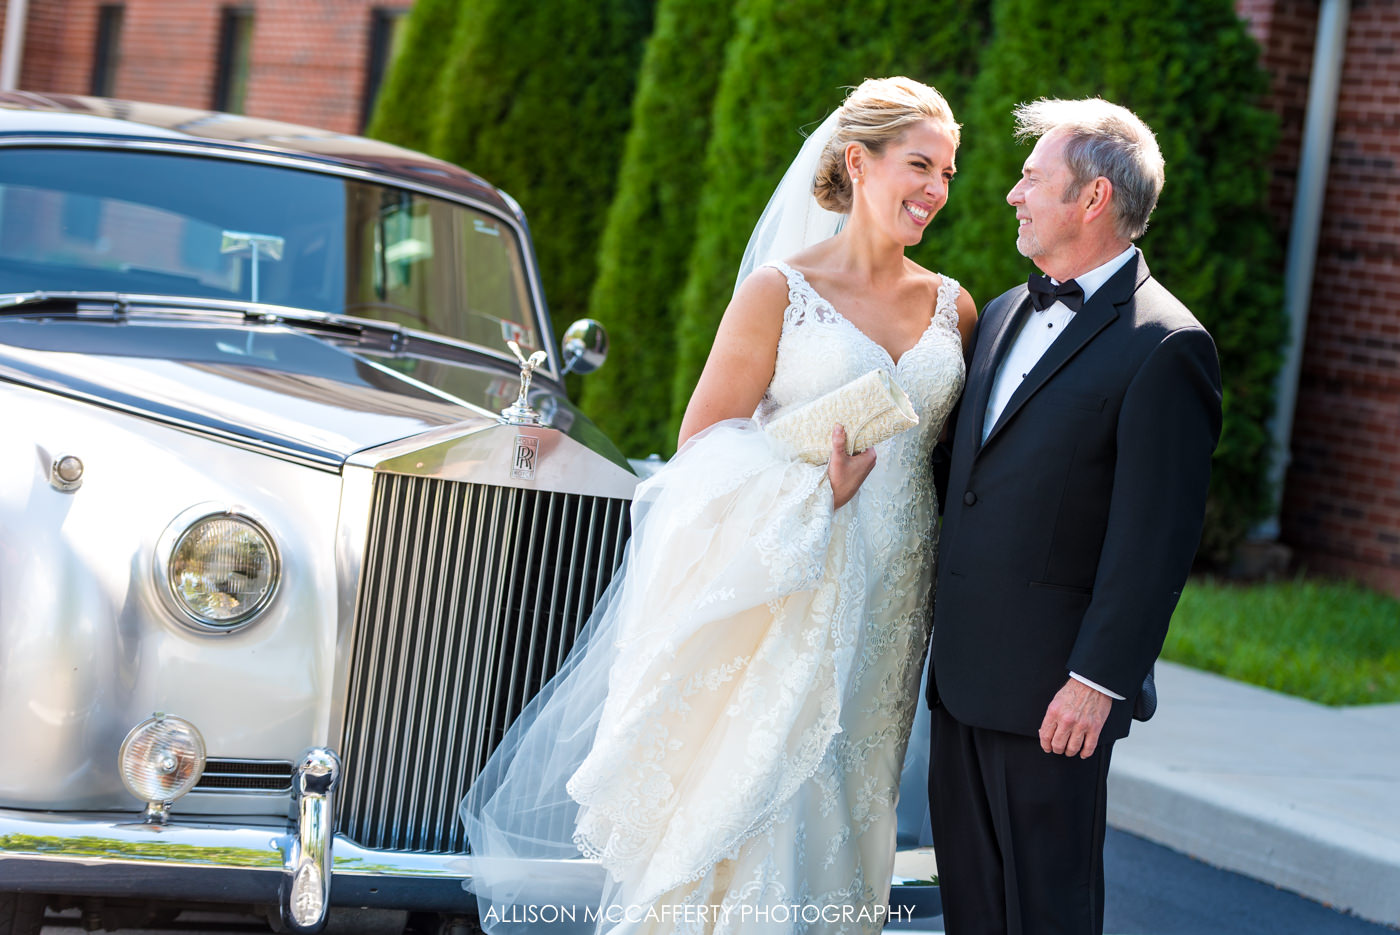 Bride and Father standing in front of a Rolls Royce on wedding day